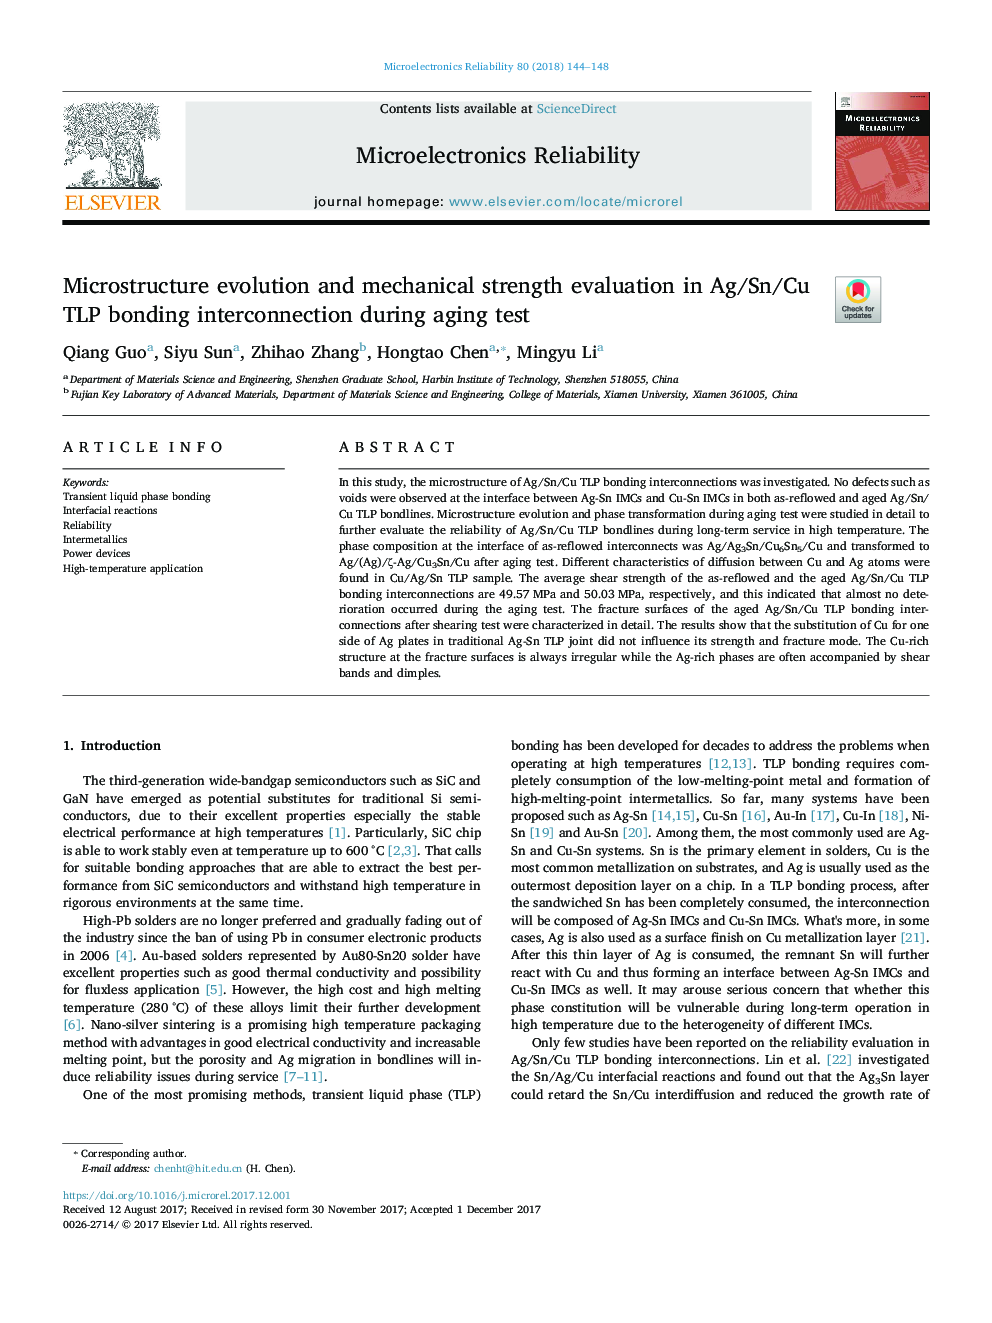 Microstructure evolution and mechanical strength evaluation in Ag/Sn/Cu TLP bonding interconnection during aging test